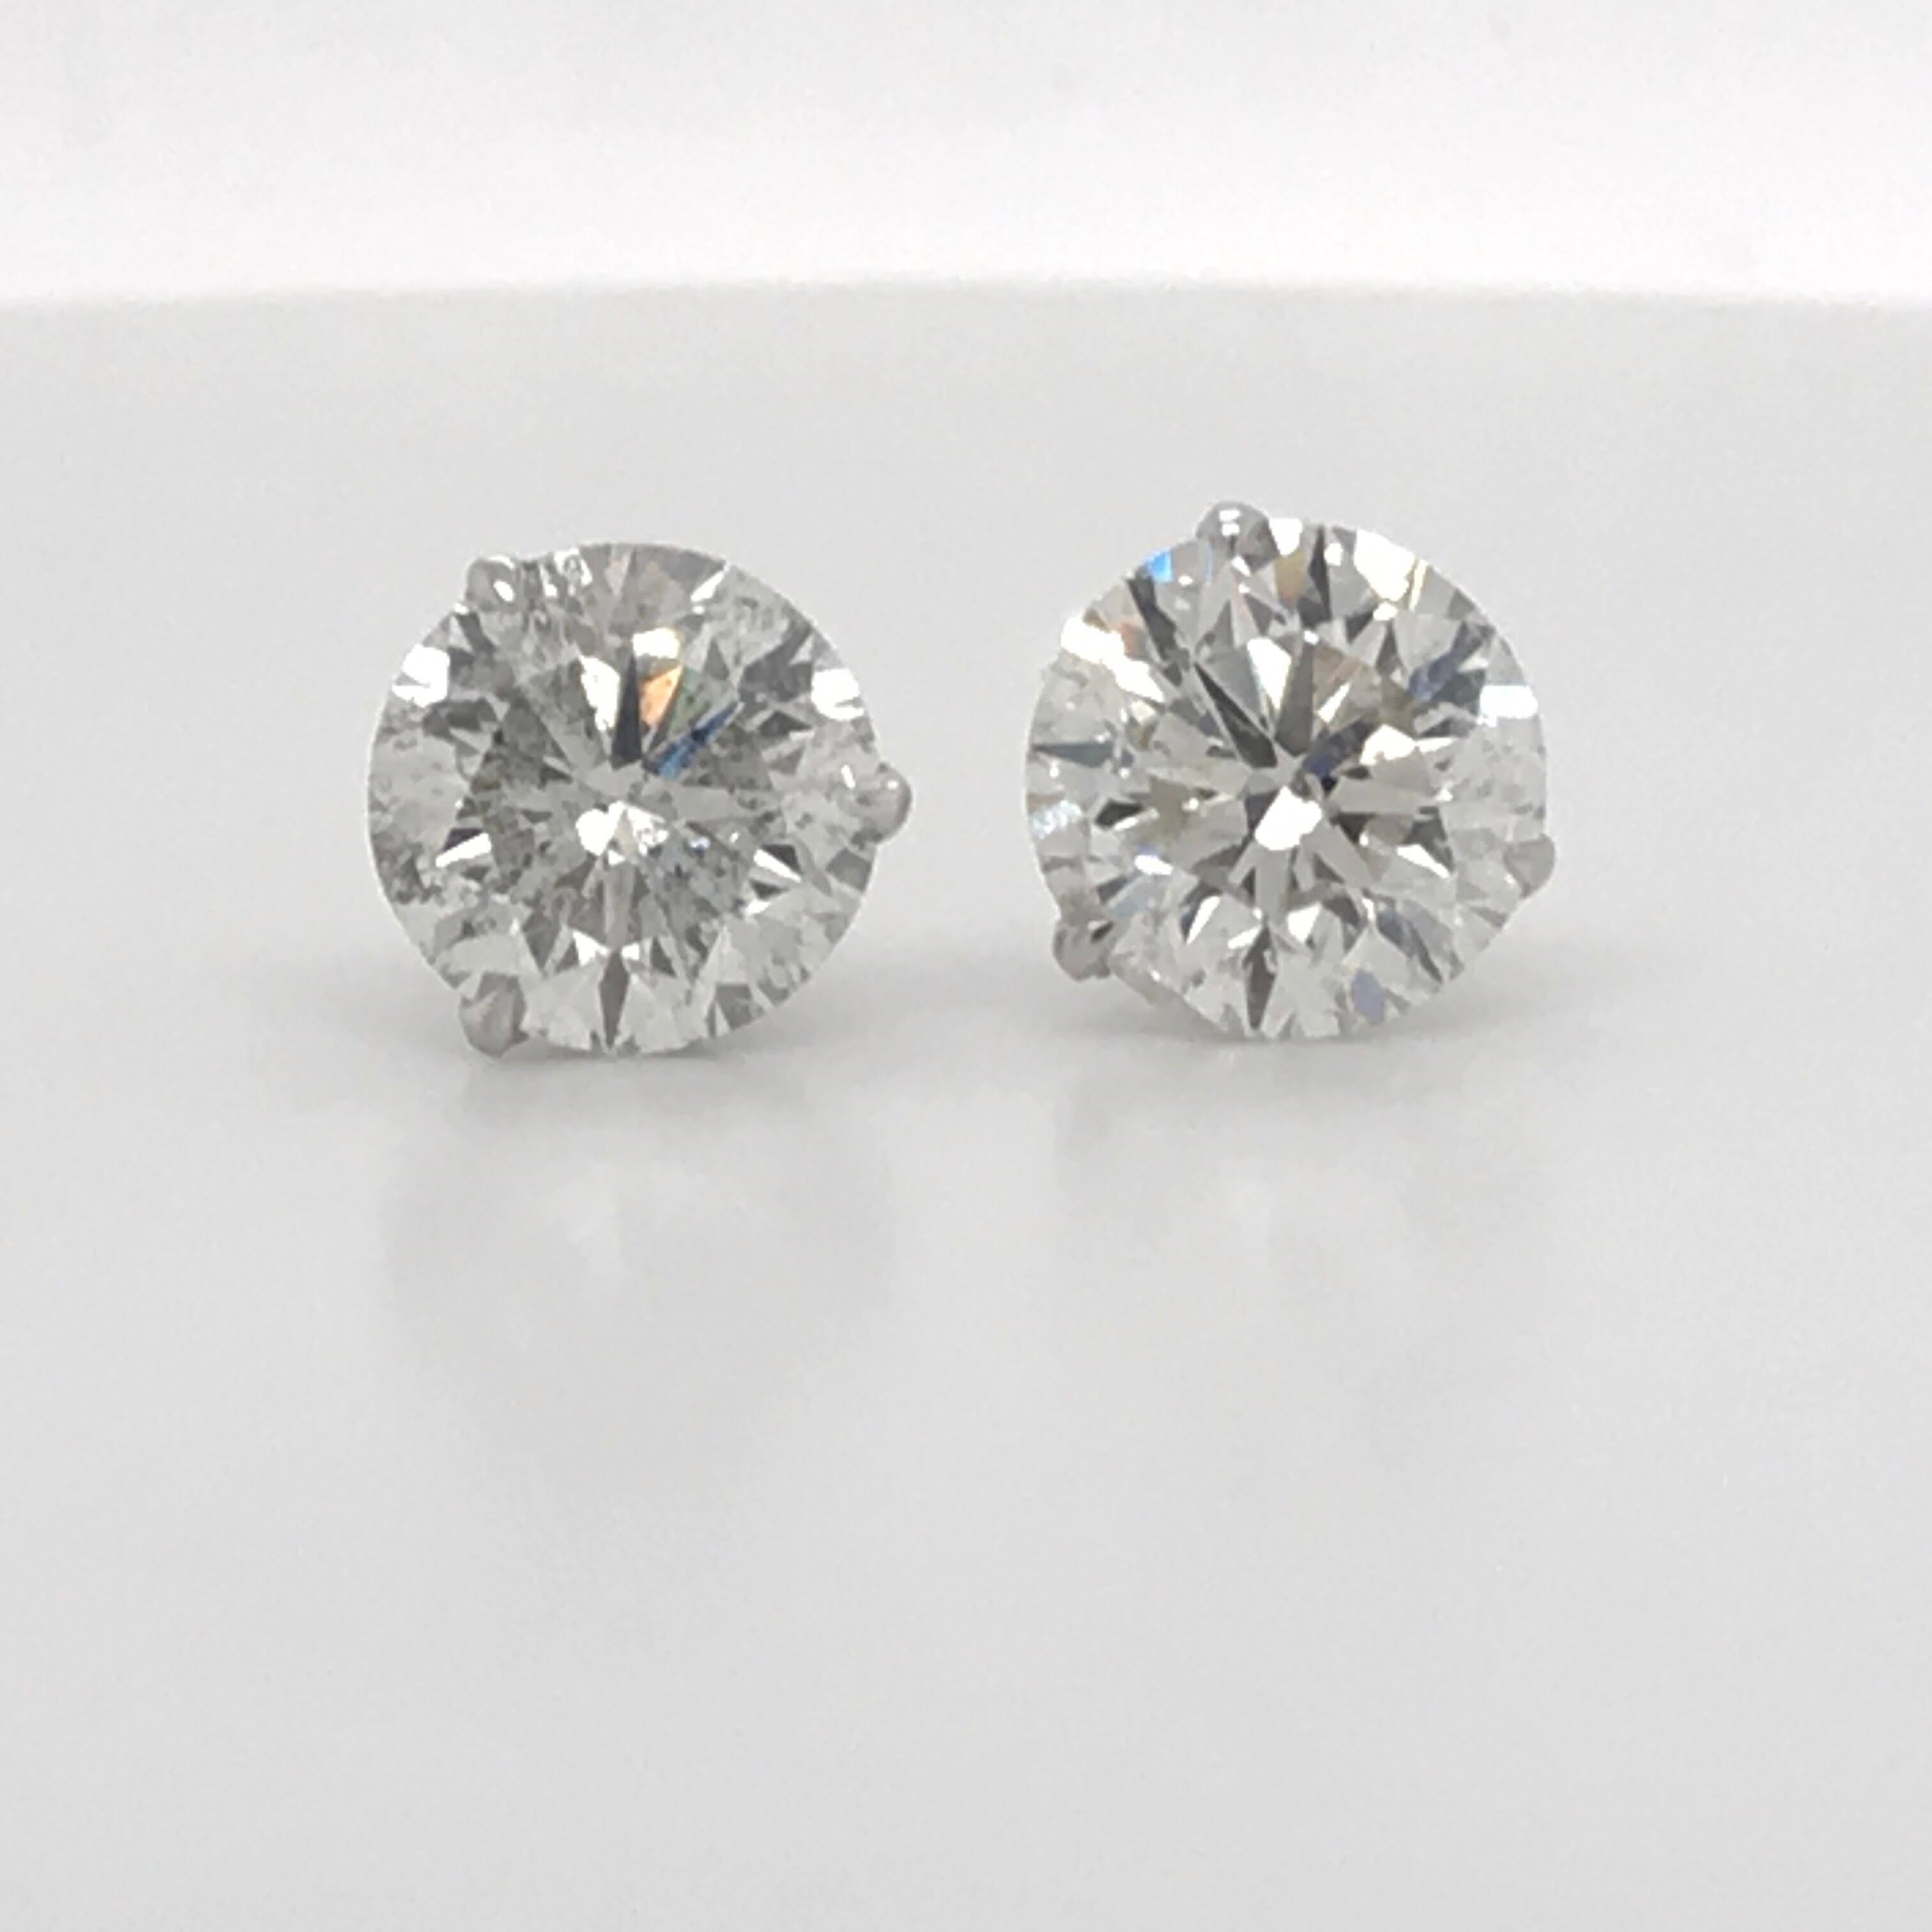 Diamond stud earrings weighing 4.87 Carats in a 14K white gold 3 prong martini setting. 
Color I-J 
Clarity I1